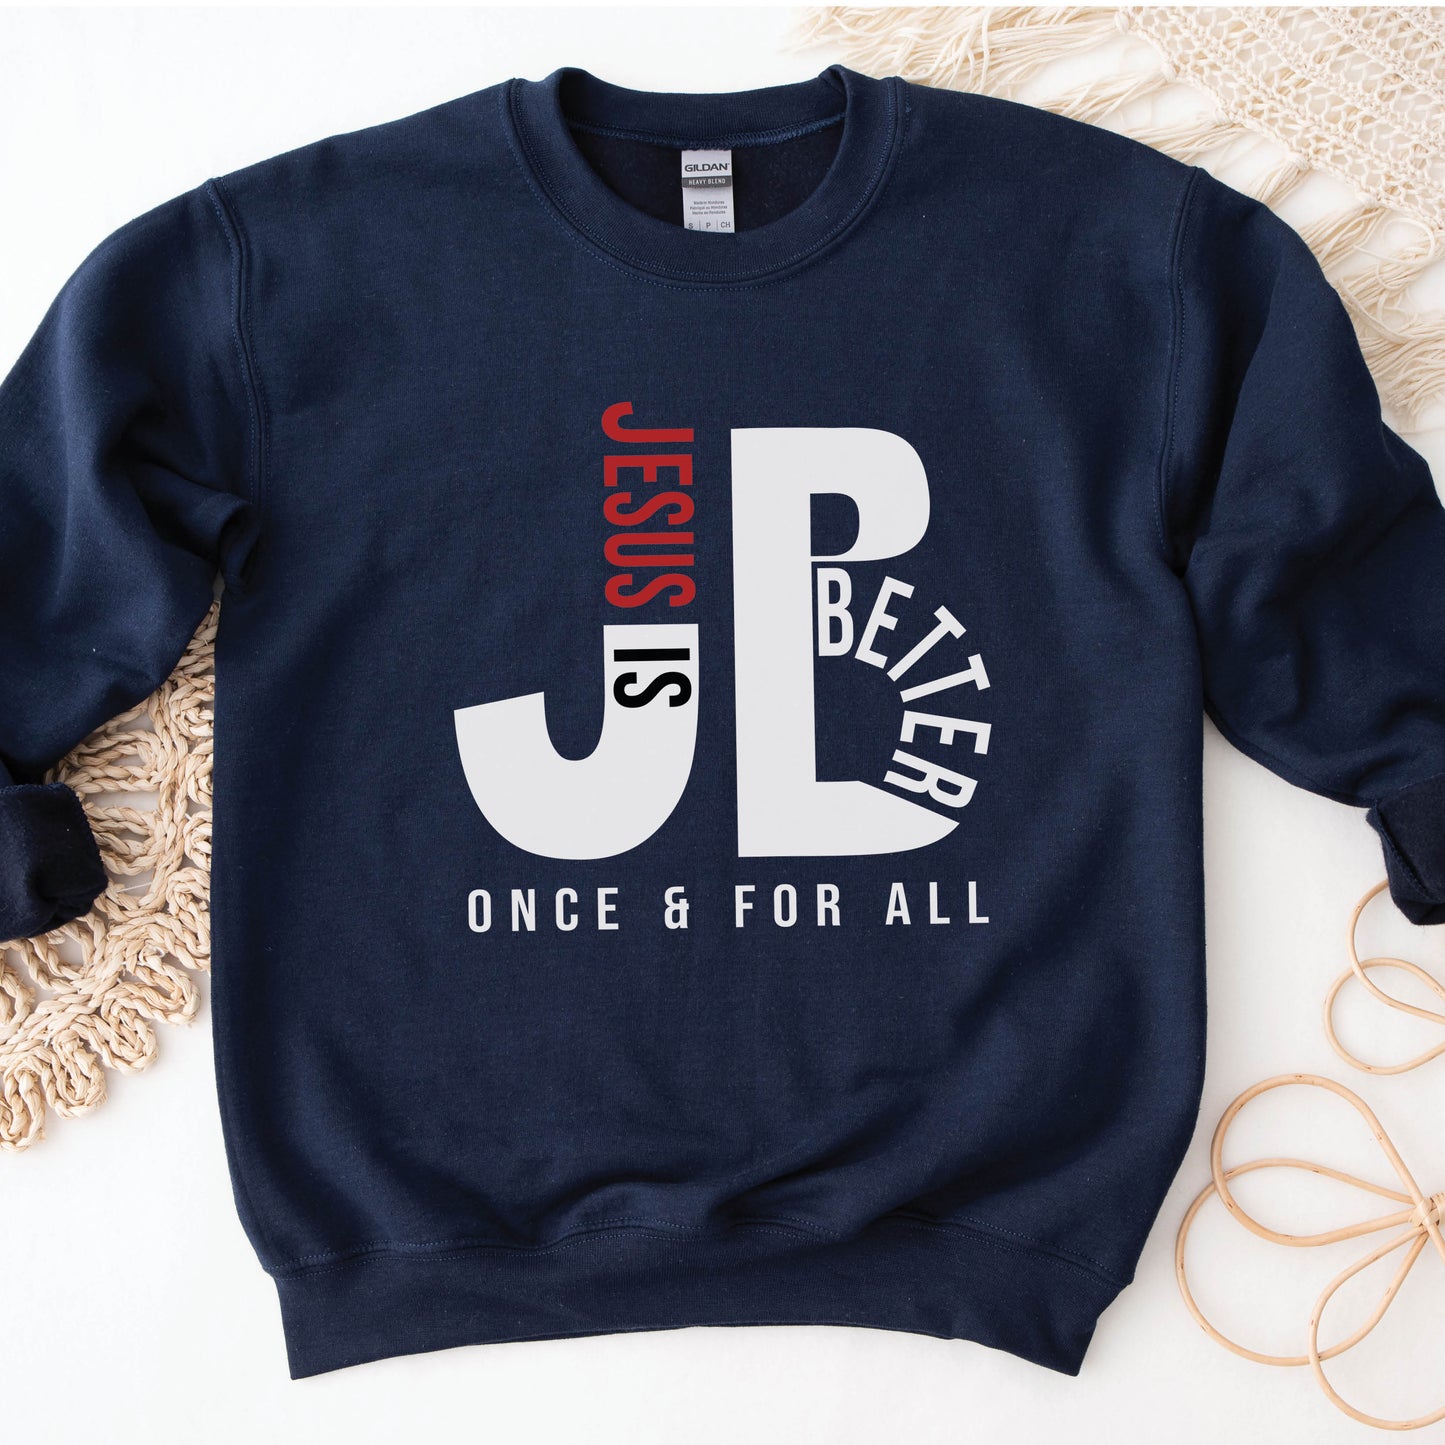 Cozy "JB" typography "Jesus is Better Once and For All" design in white and red letters, based on the Christian bible book of Hebrews, printed on a navy blue color Unisex crewneck sweatshirt, created for faith-based men and women, great father's day gift for dad